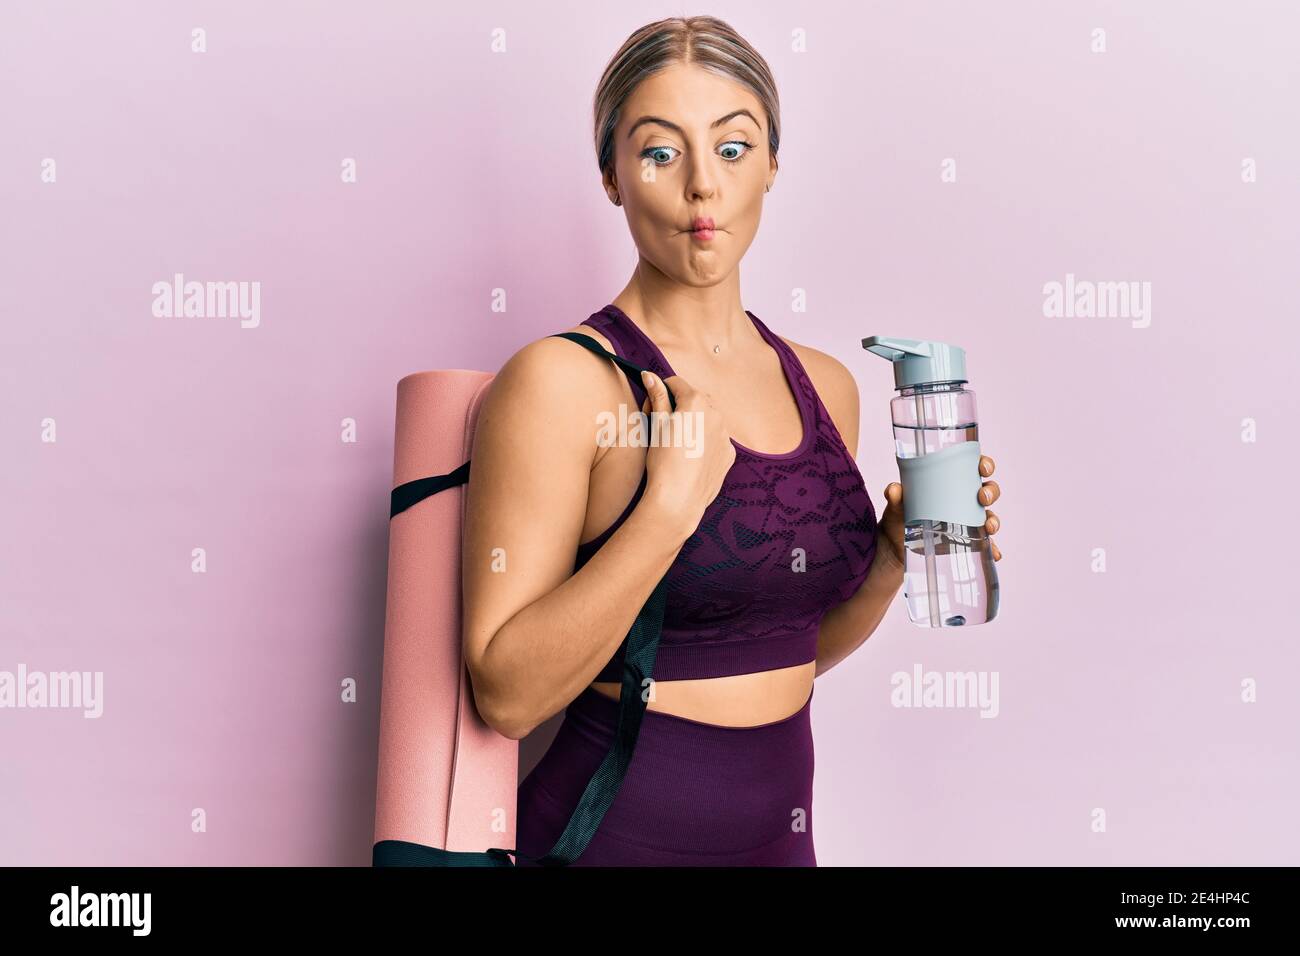 https://c8.alamy.com/comp/2E4HP4C/beautiful-blonde-woman-wearing-sportswear-holding-water-bottle-and-yoga-mat-making-fish-face-with-mouth-and-squinting-eyes-crazy-and-comical-2E4HP4C.jpg